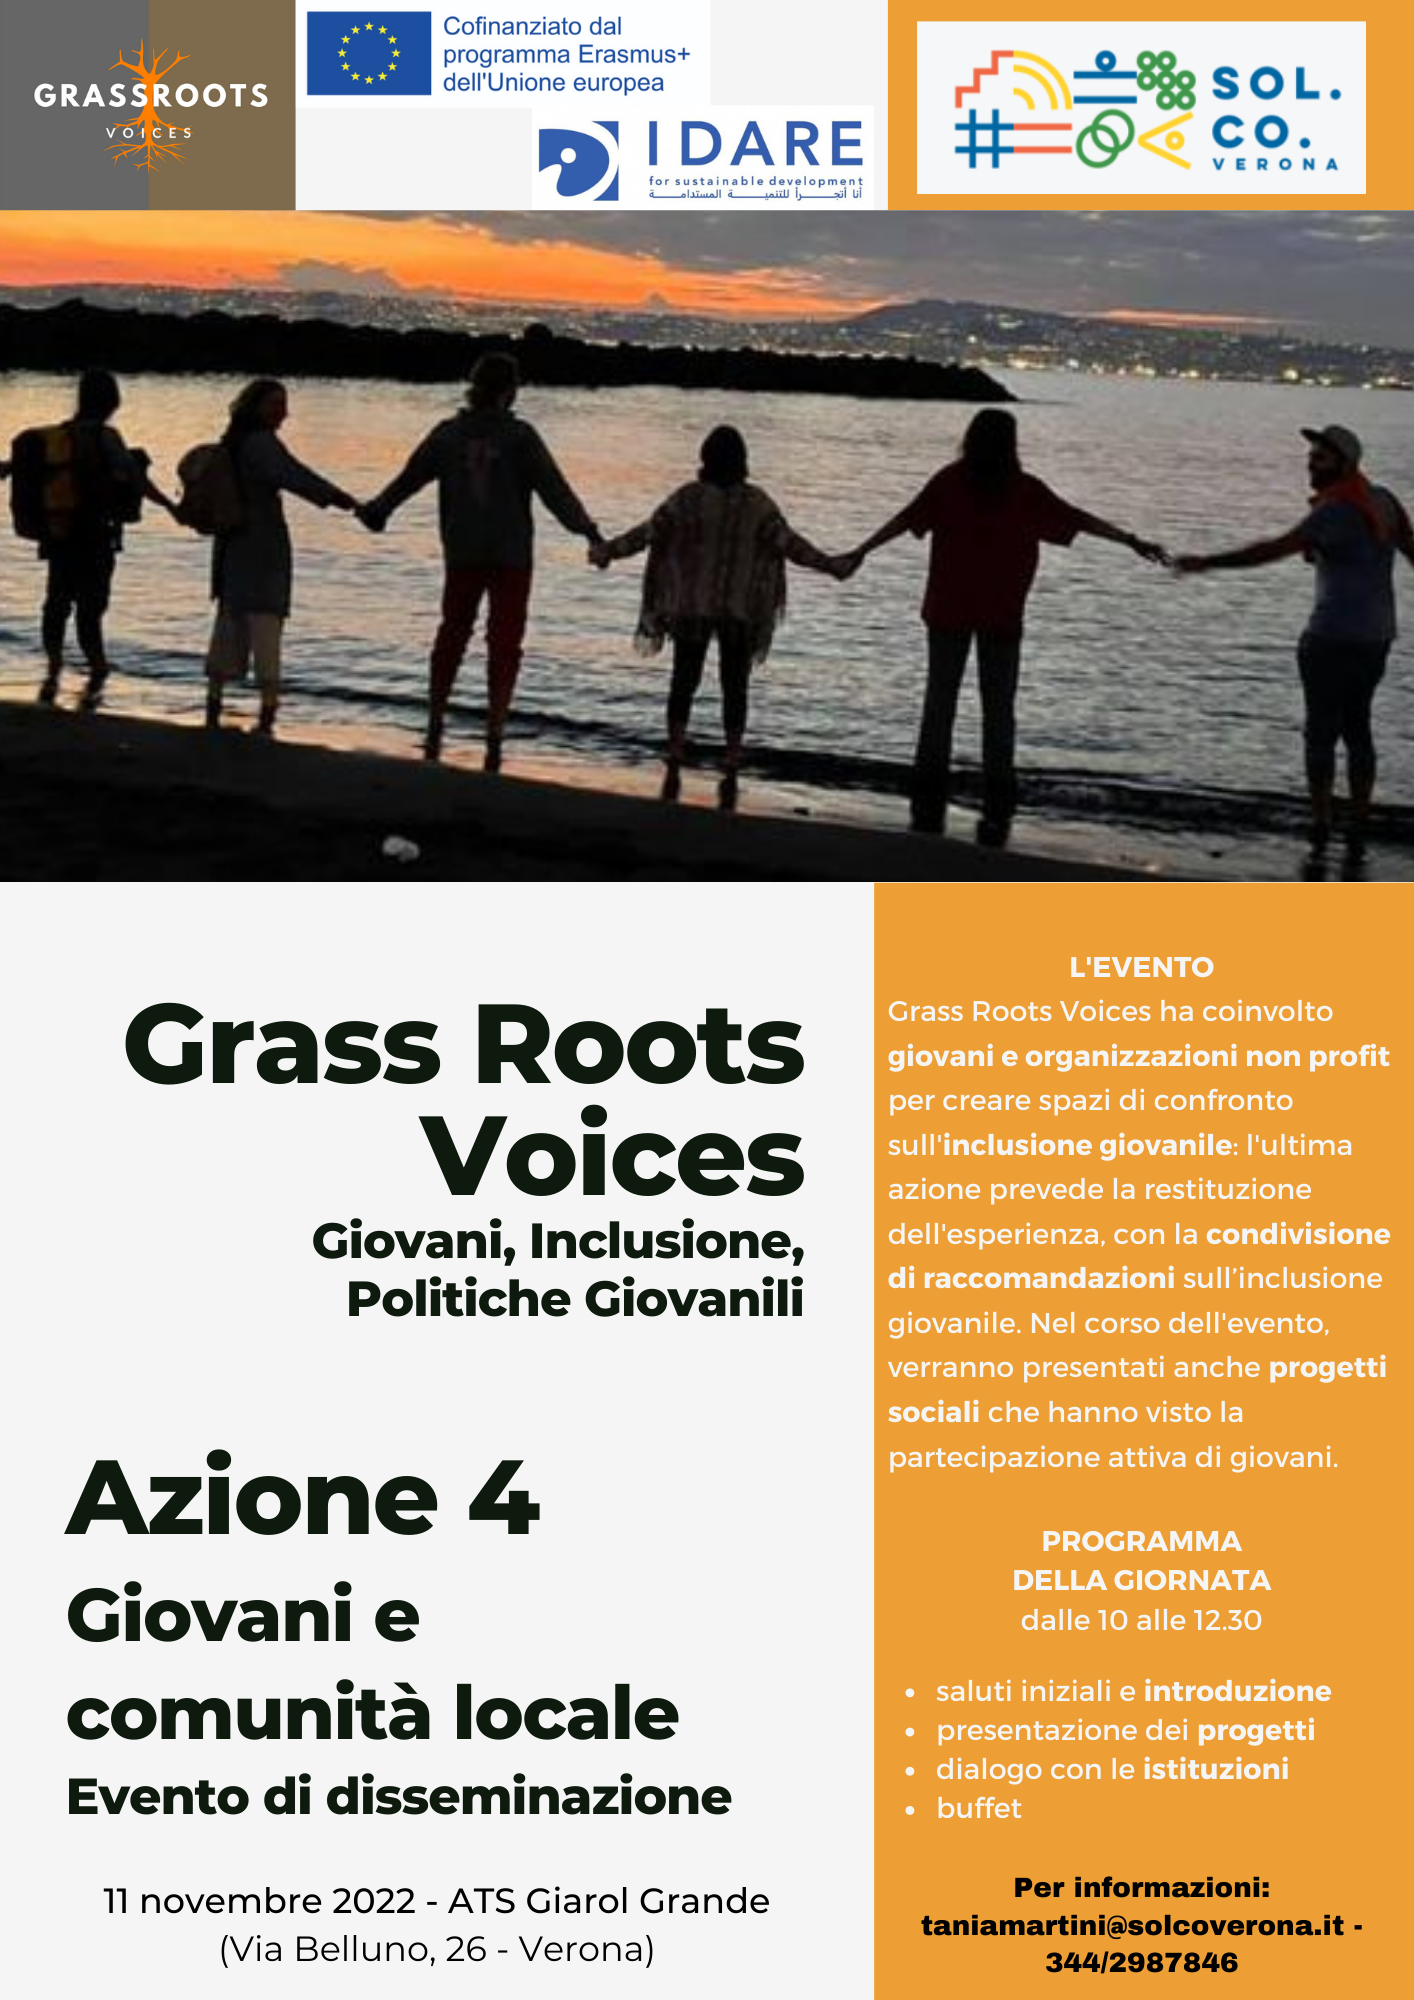 Grass Roots Voices VR